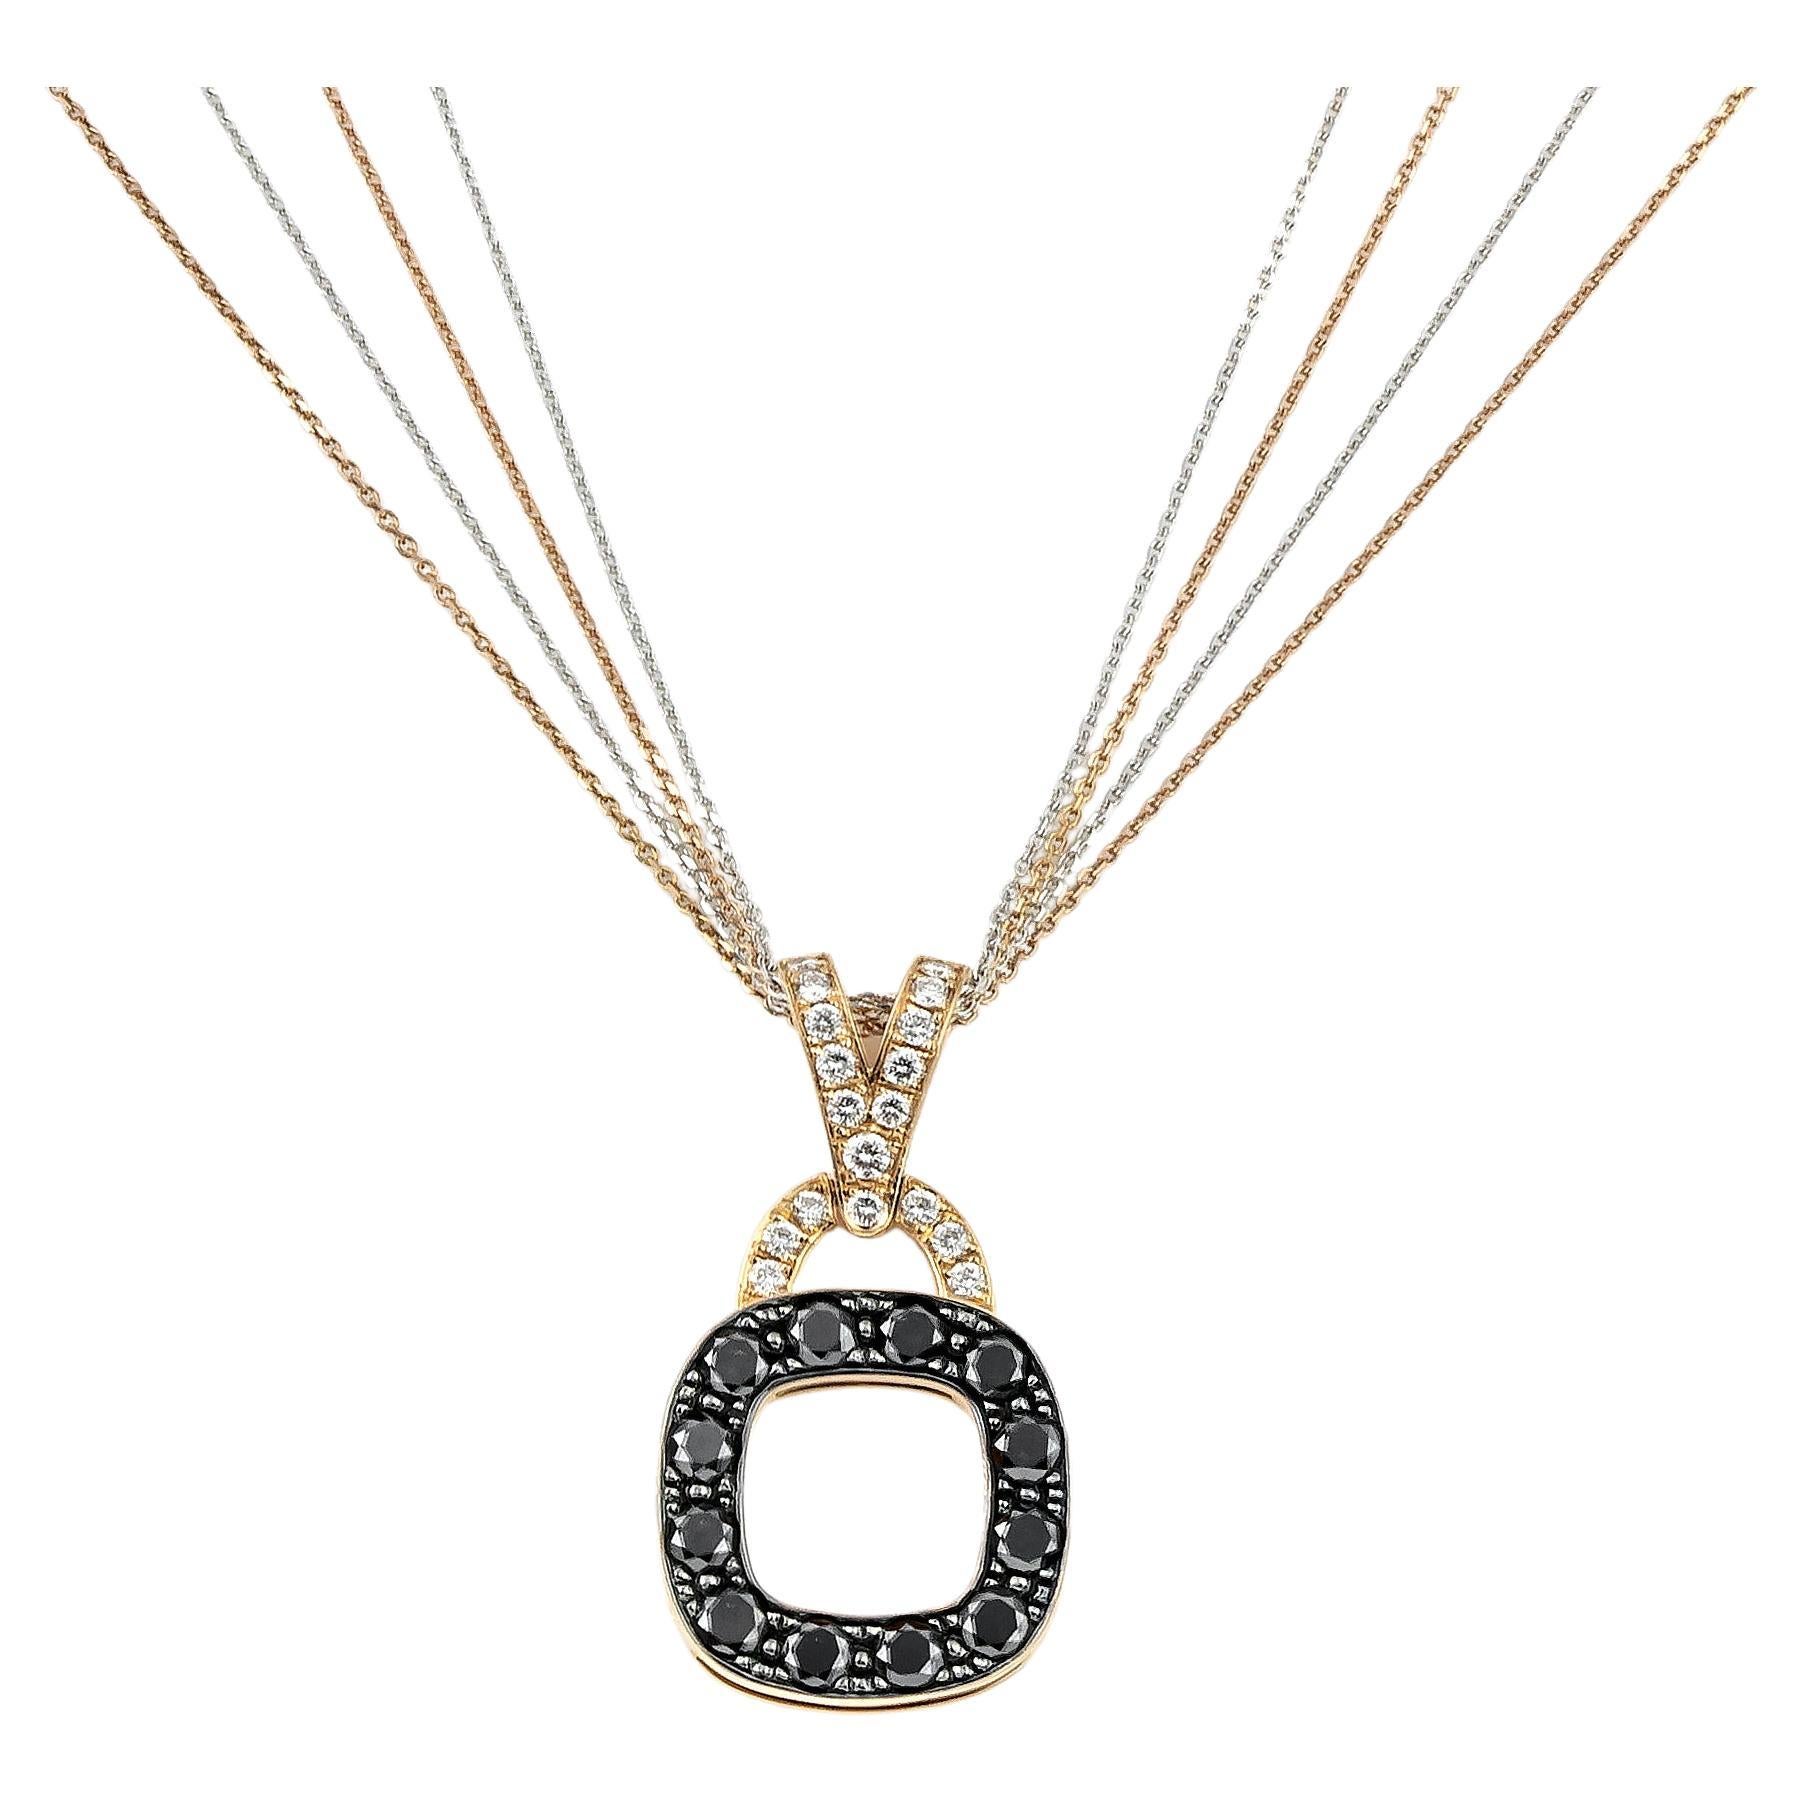 Rounded Square Black and White Pave Diamonds Pendant Necklace in 18kt Rose Gold For Sale